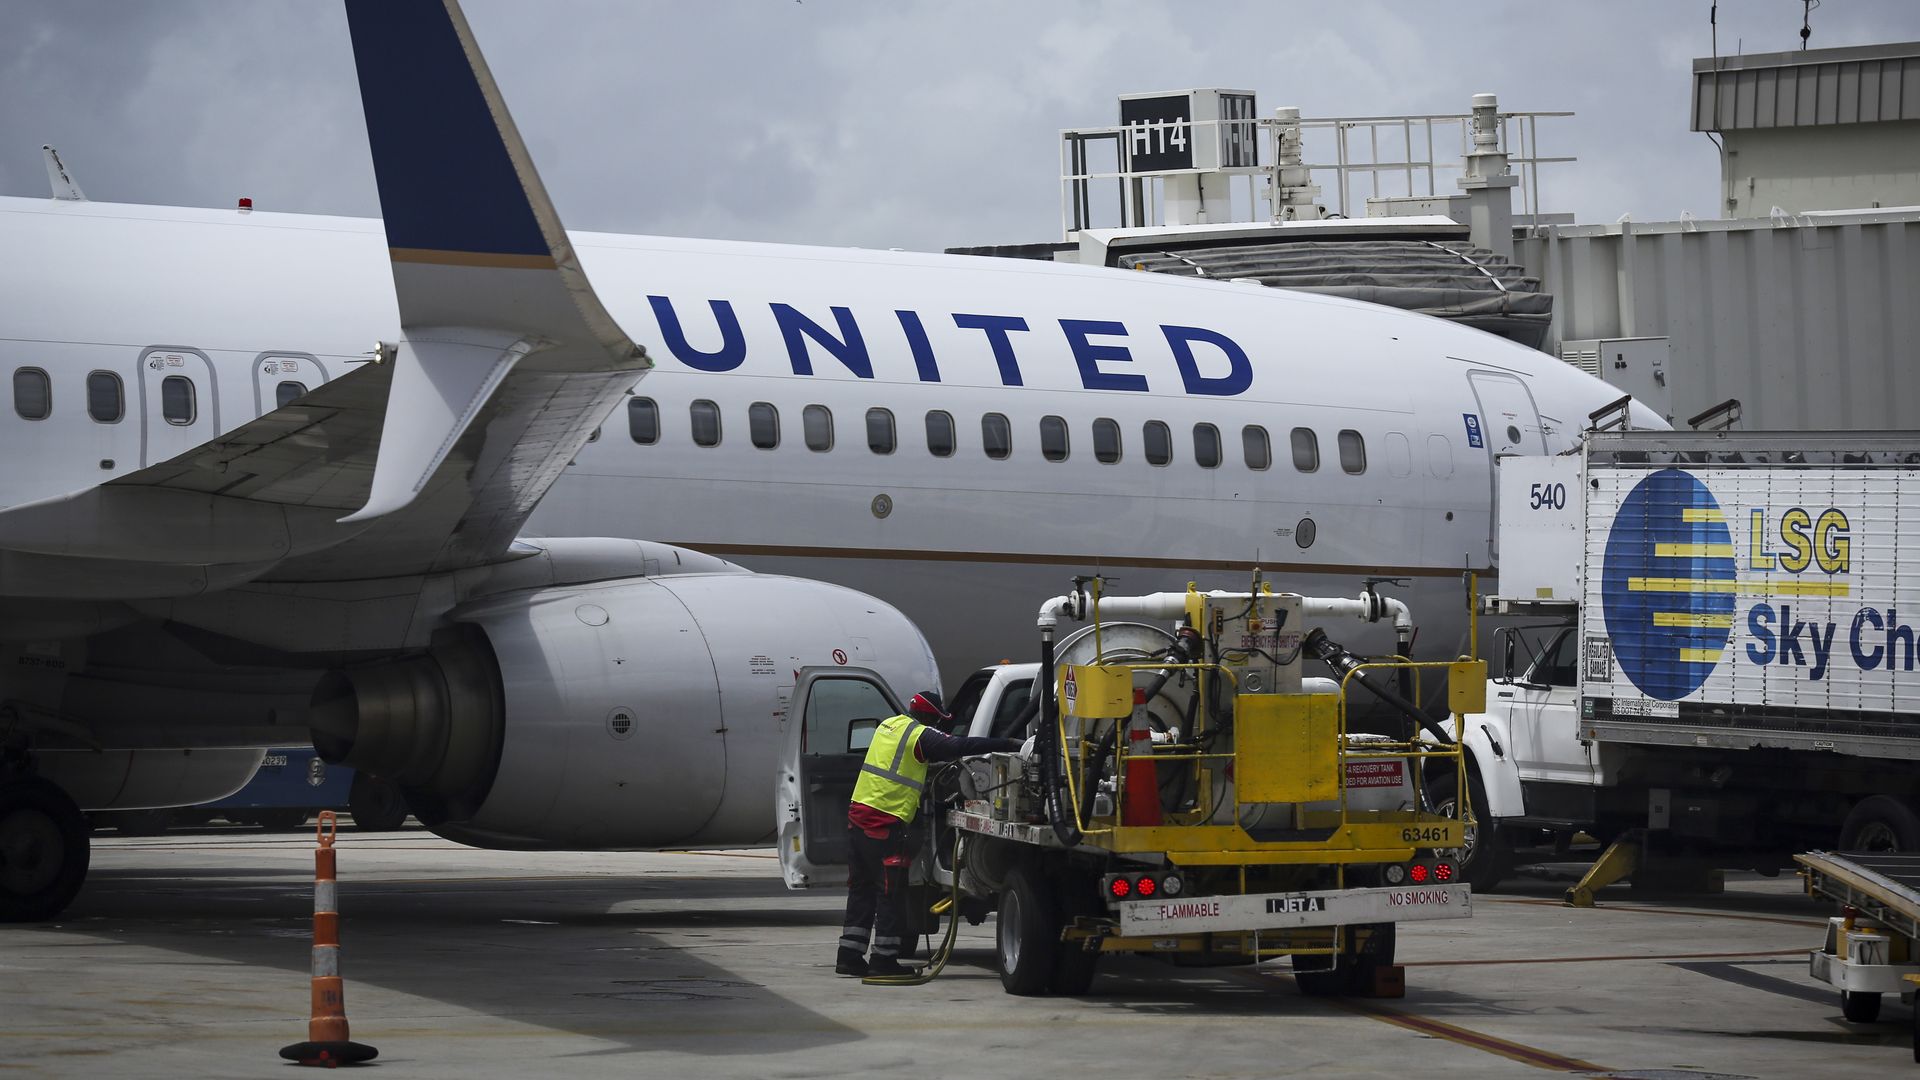 A United Airlines airplane is seen at a gate of Miami International Airport, in Miami, Florida, United States on June 16, 2021. 